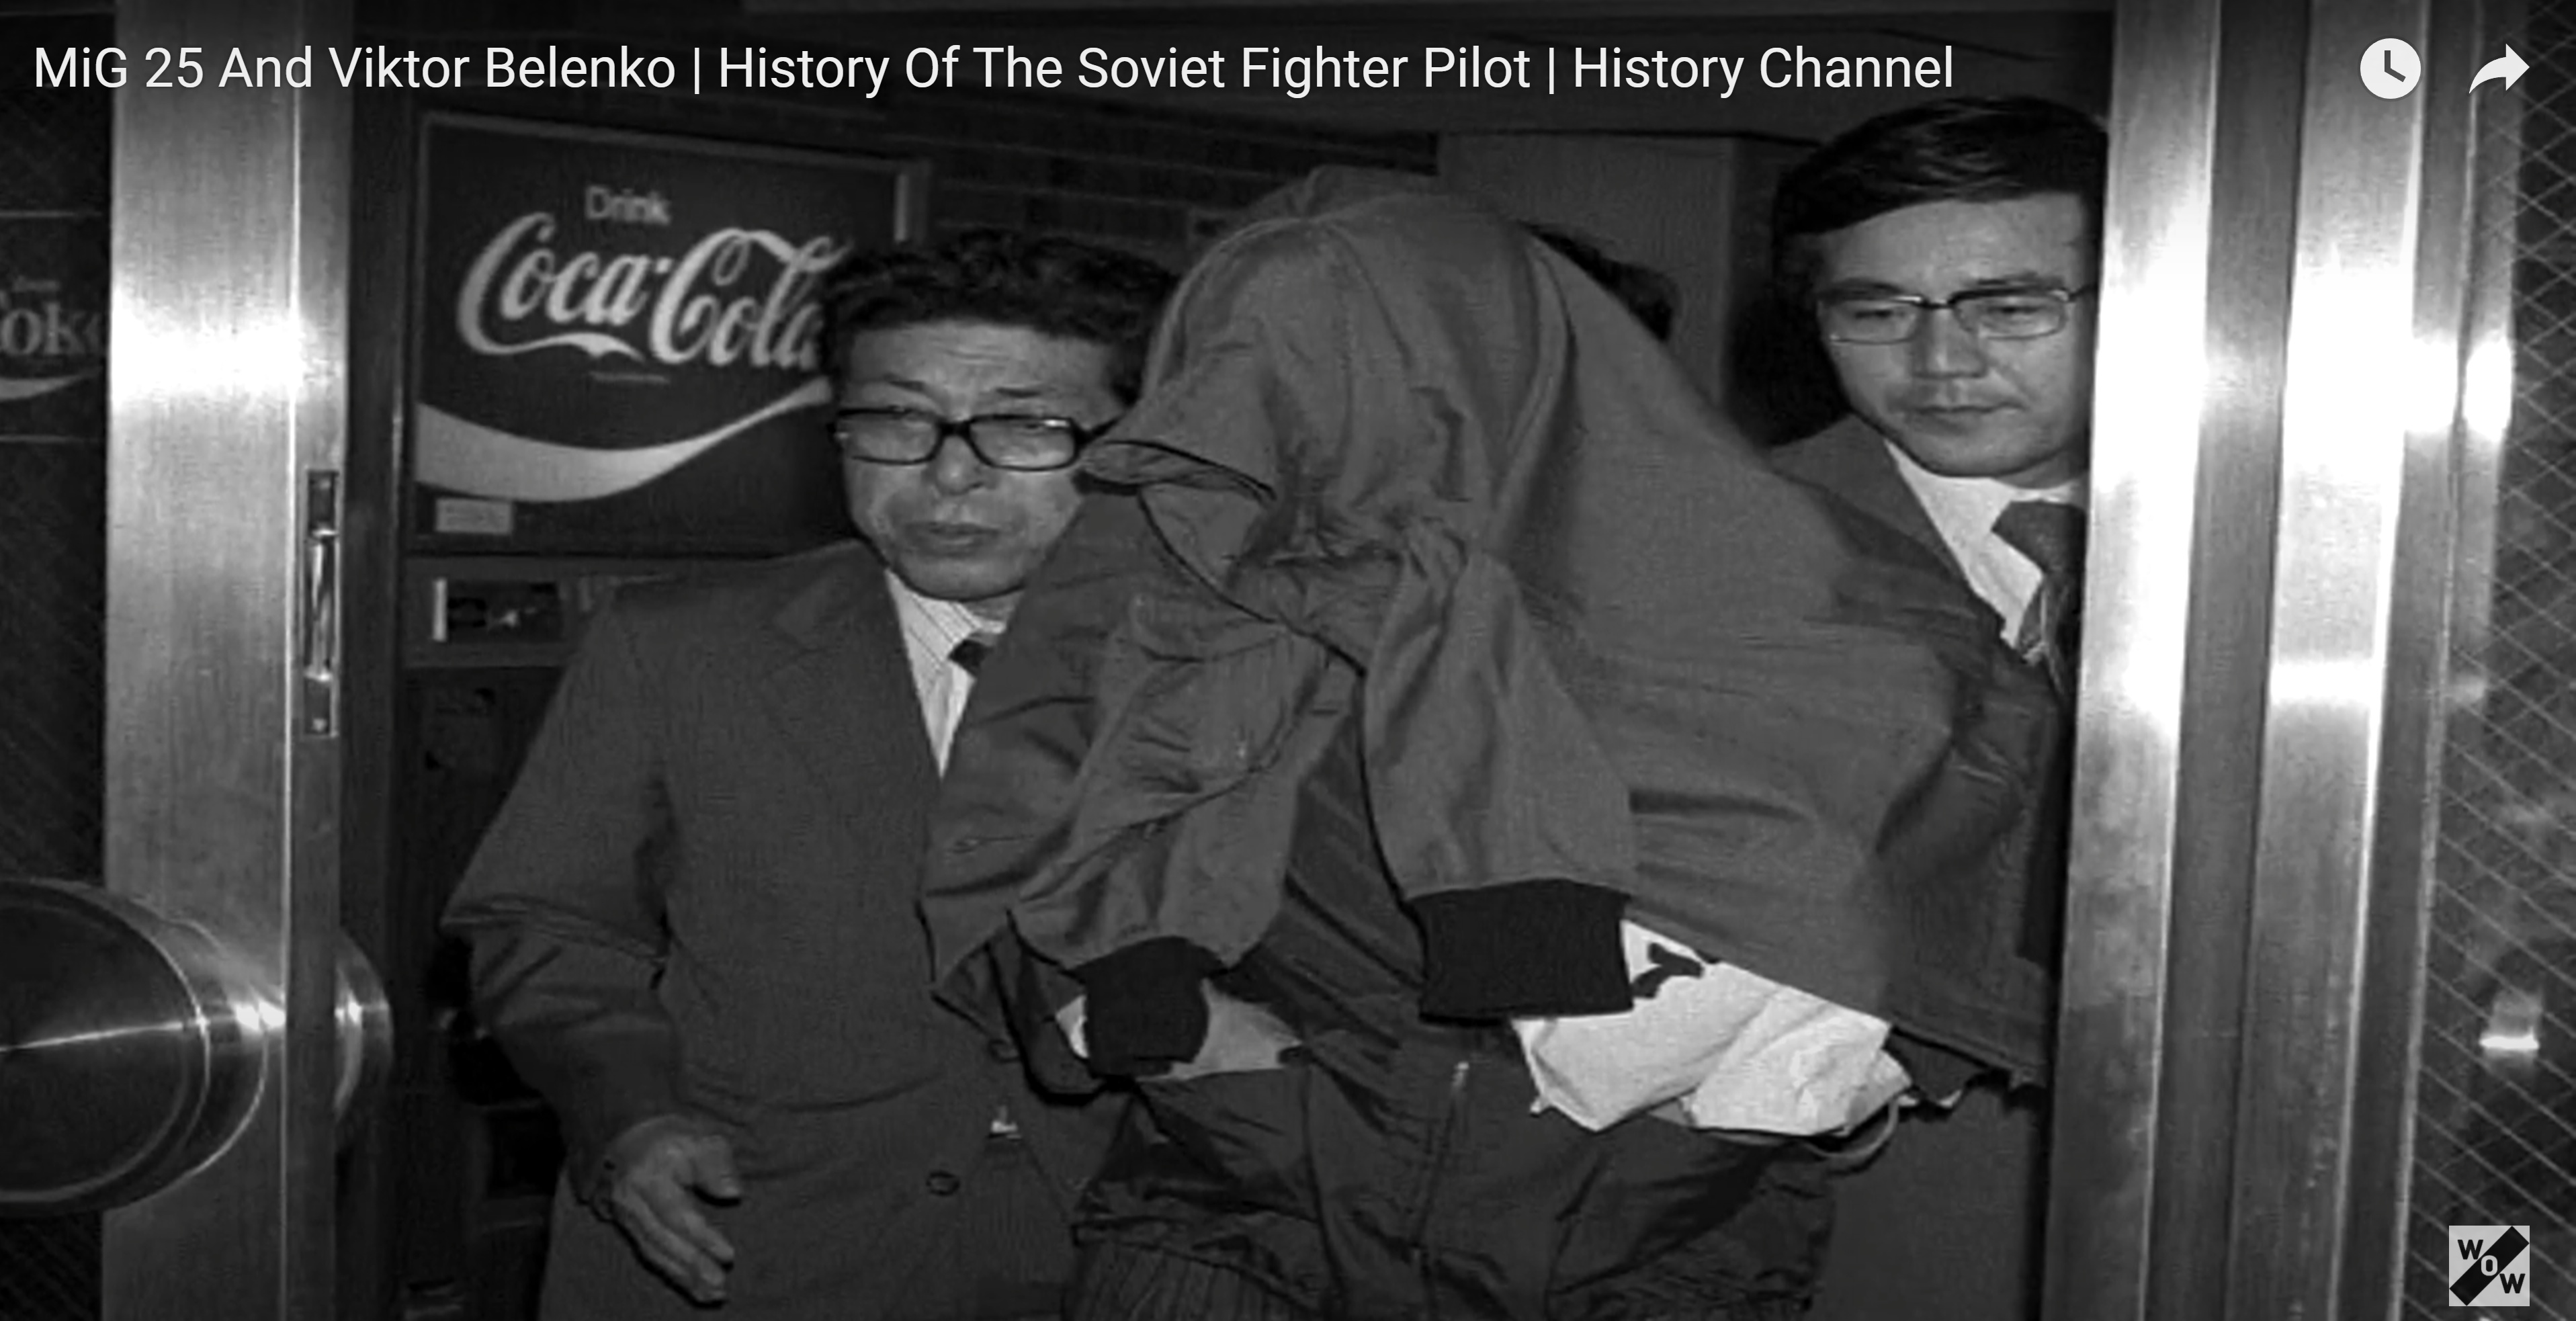 A recent eBaum's feature made the incorrect statement that the Coca-Cola logo never had a dash and that anyone who remembers such is suffering from the Mandela effect. This historical photo of the defection of Soviet pilot Viktor Belenko shows a vending machine in the background showing the infamous dash.